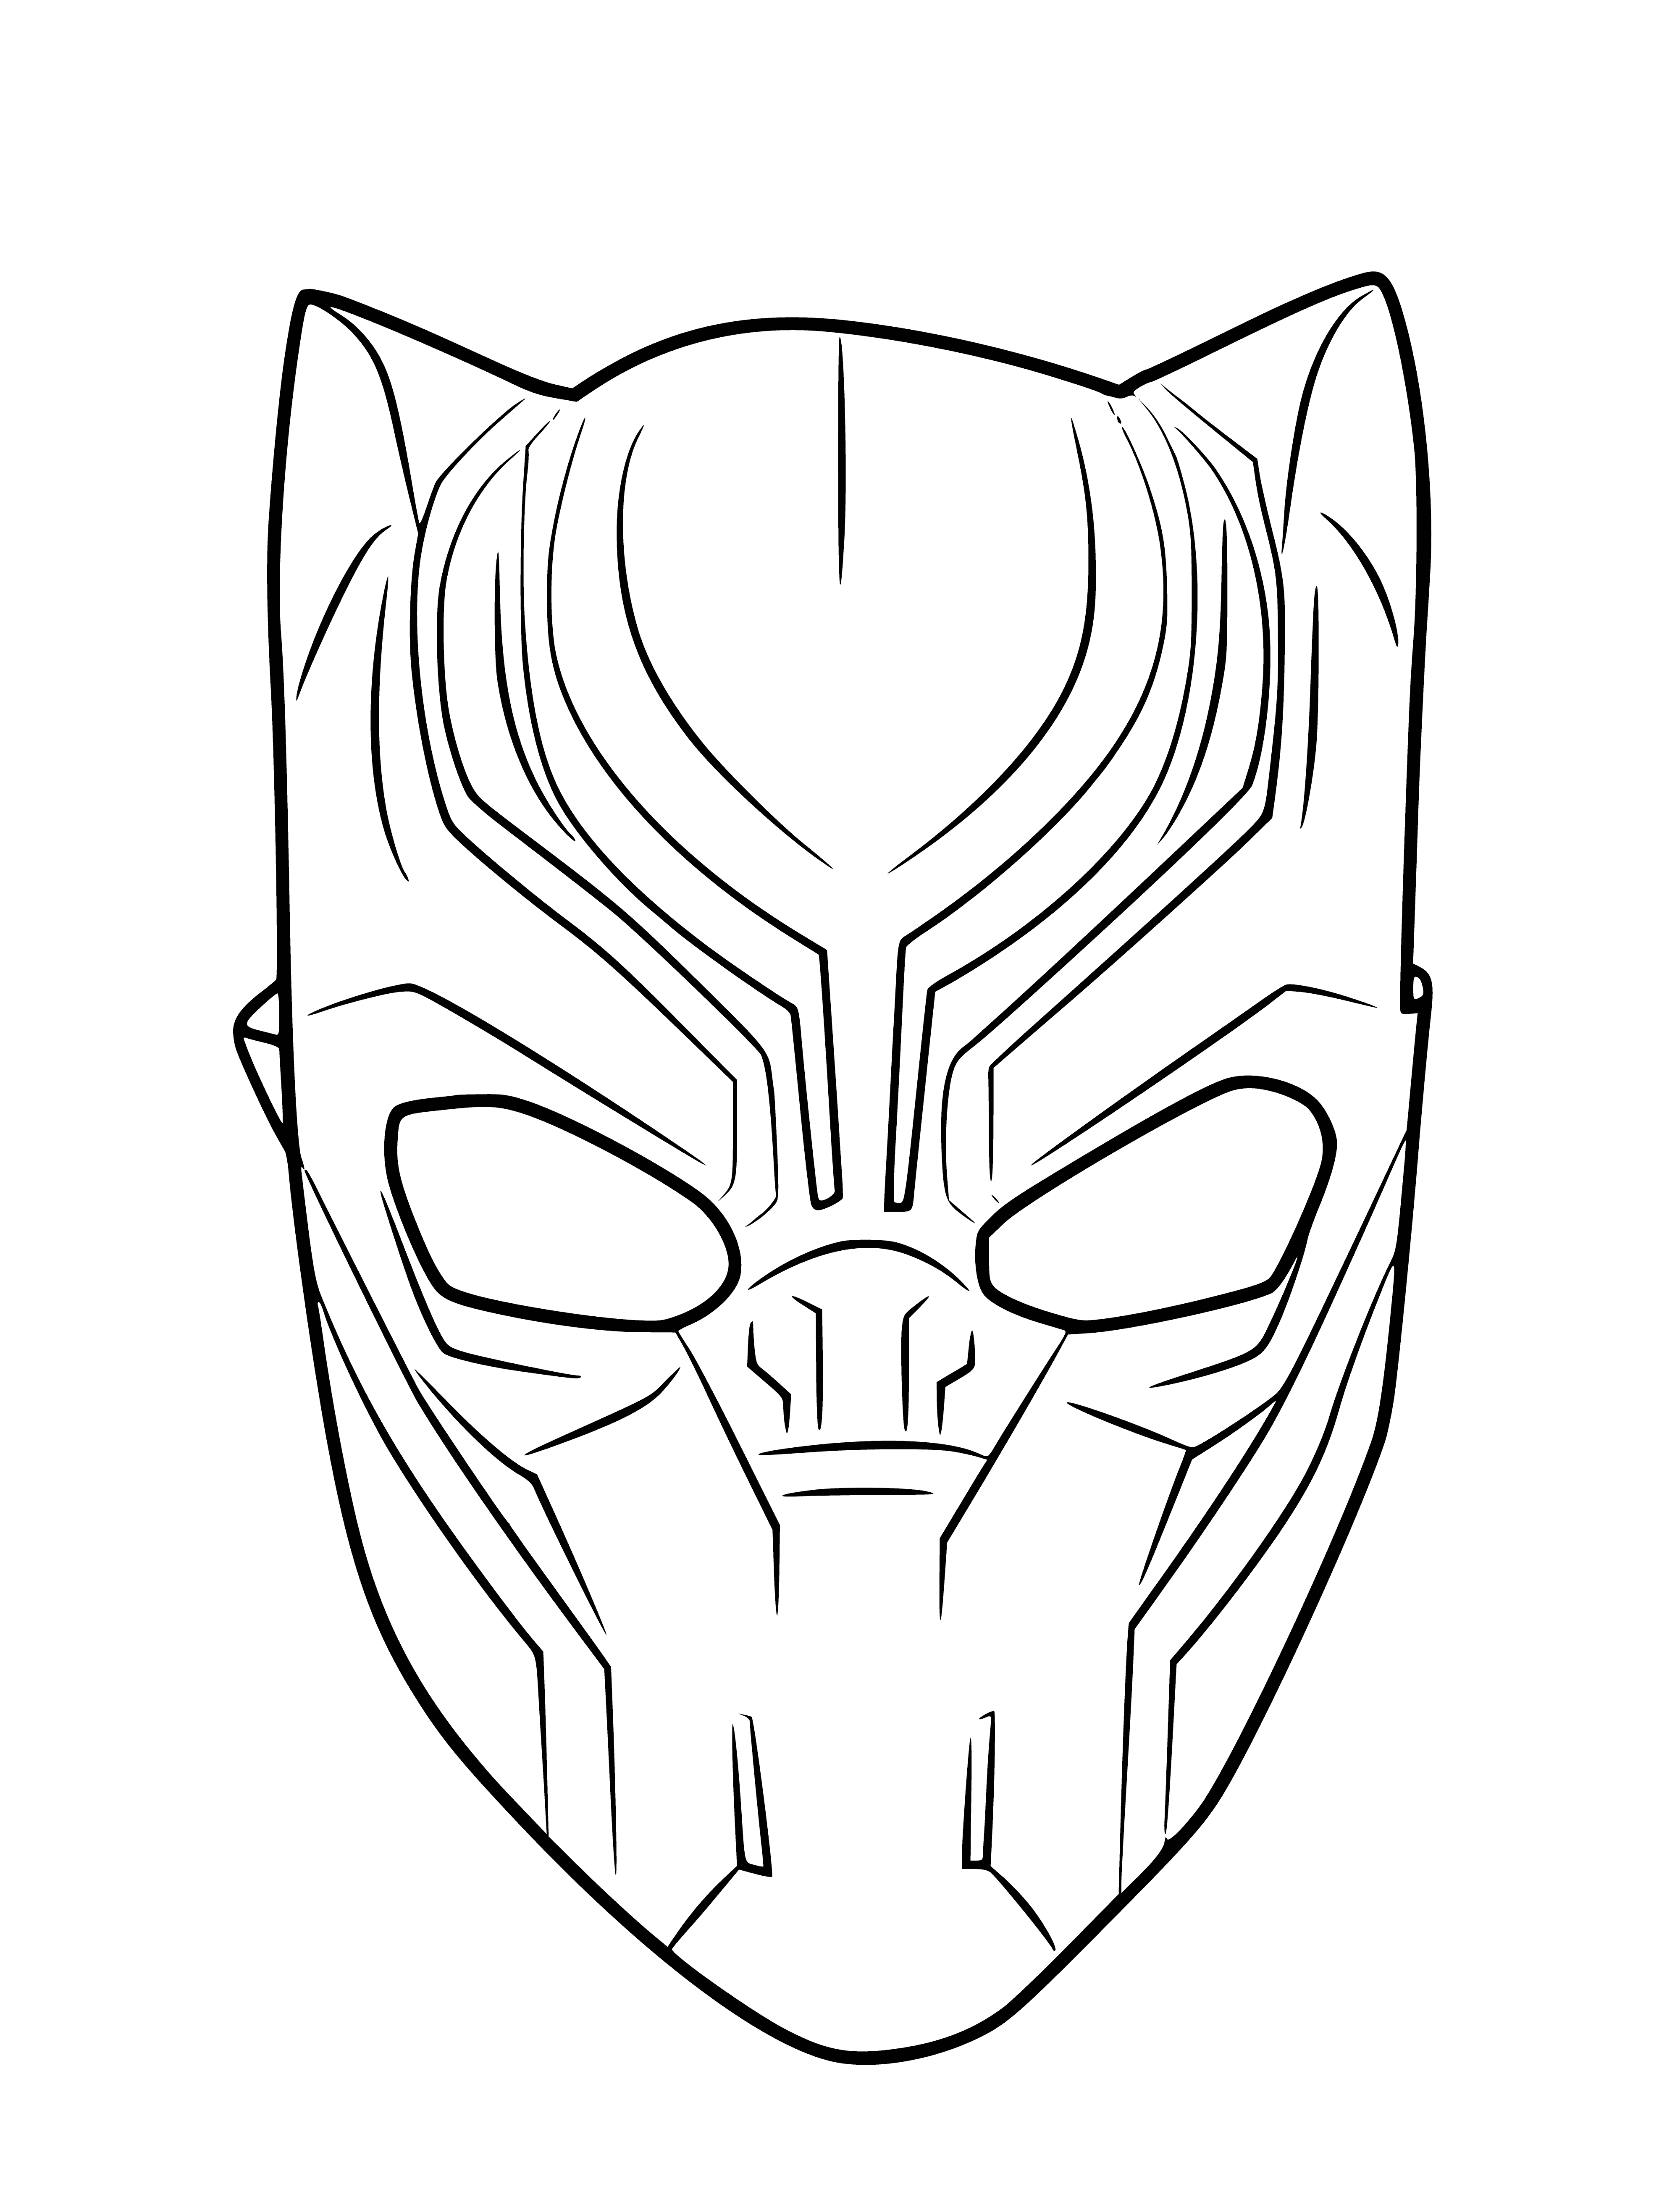 coloring page: The Black Panther Mask is an all-black headpiece with two white stripes down the middle and pointy ears. It has eye holes for visibility. #Avengers